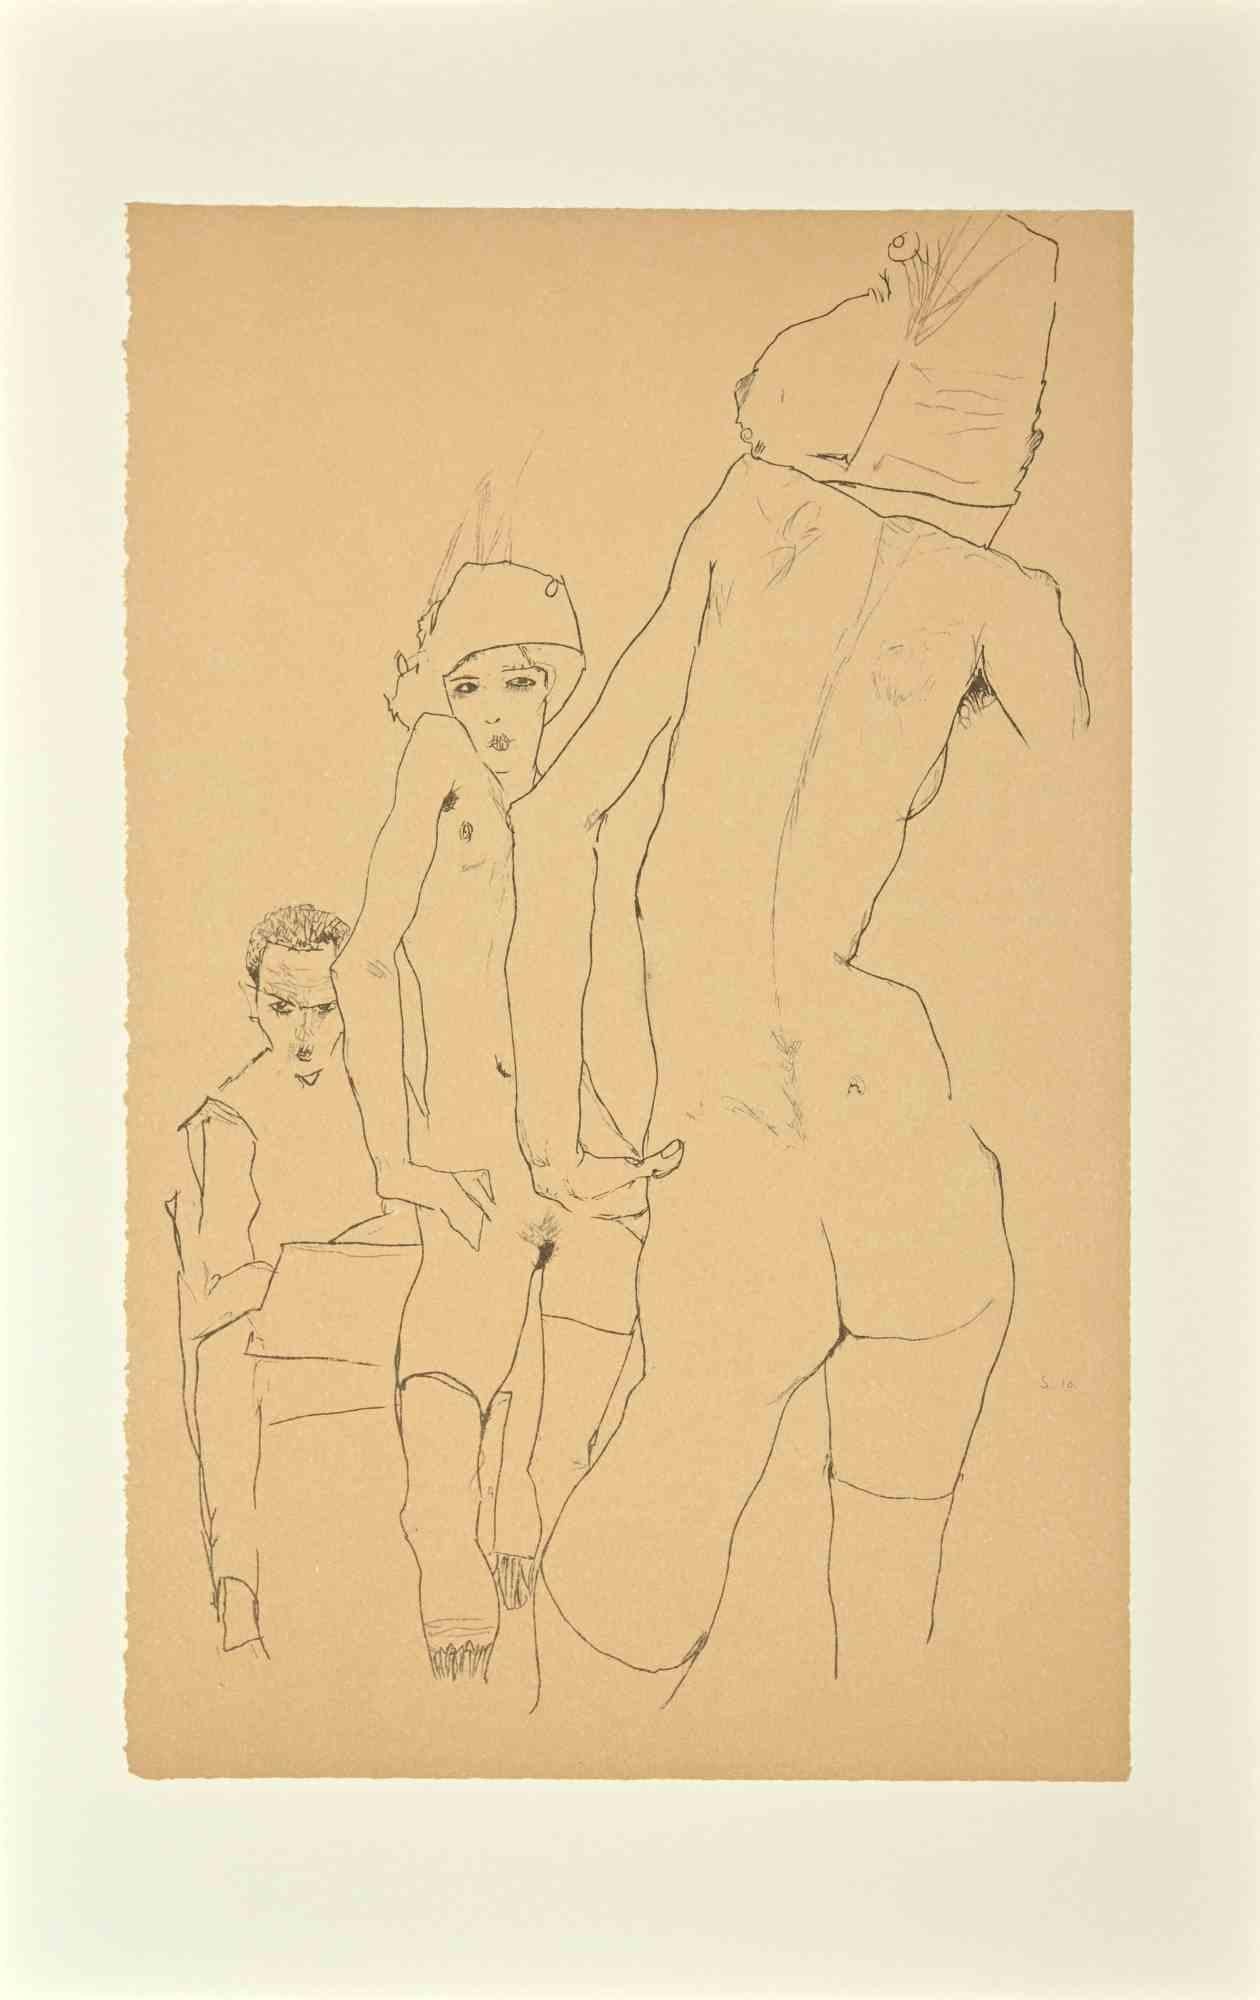 Egon Schiele Portrait Print - Schiele Drawing a Nude Model in front of a Mirror-Lithograph-2007